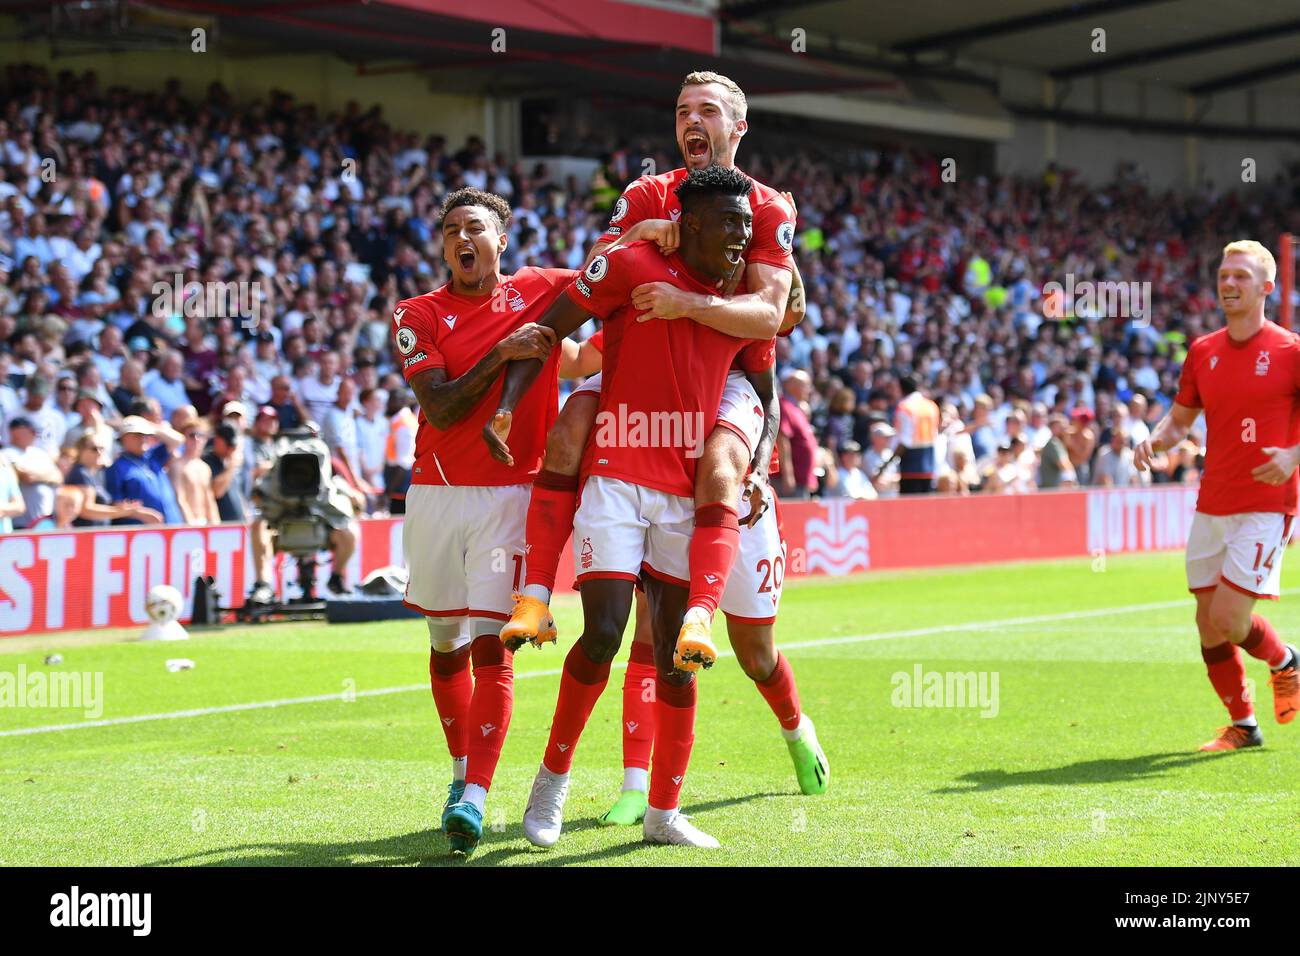 Nottingham, UK. 14th August 2022Taiwo Awoniyi of Nottingham Forest celebrates after scoring a goal to make it 1-0 during the Premier League match between Nottingham Forest and West Ham United at the City Ground, Nottingham on Sunday 14th August 2022. (Credit: Jon Hobley | MI News) Credit: MI News & Sport /Alamy Live News Stock Photo